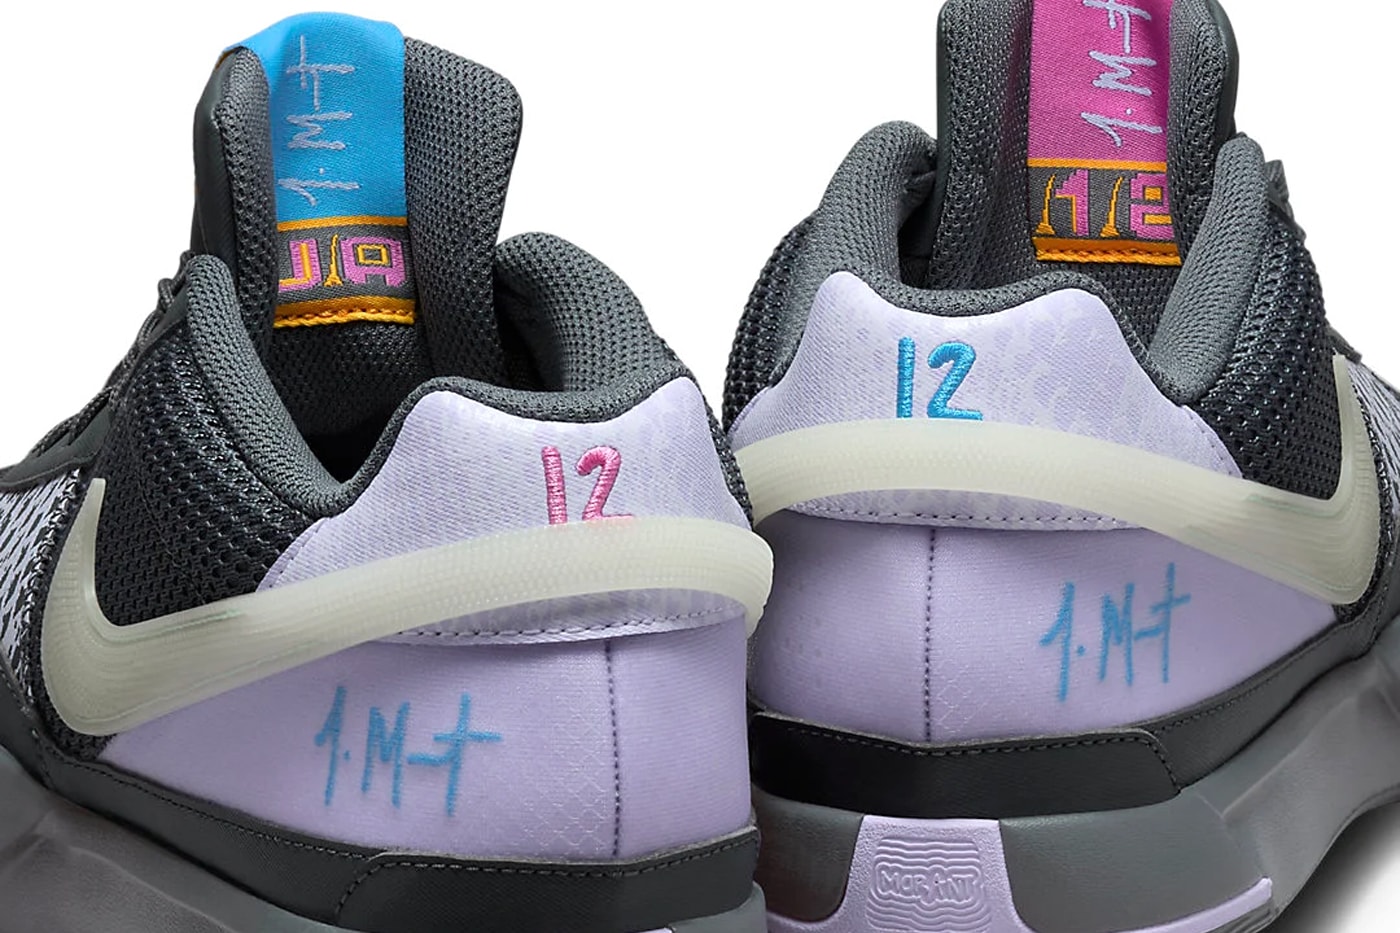 Official Look at the Nike Ja 1 "Personal Touch" Iron Grey/Lilac Bloom-Light Photo Blue-Multi-Color FV1288-001 release info 